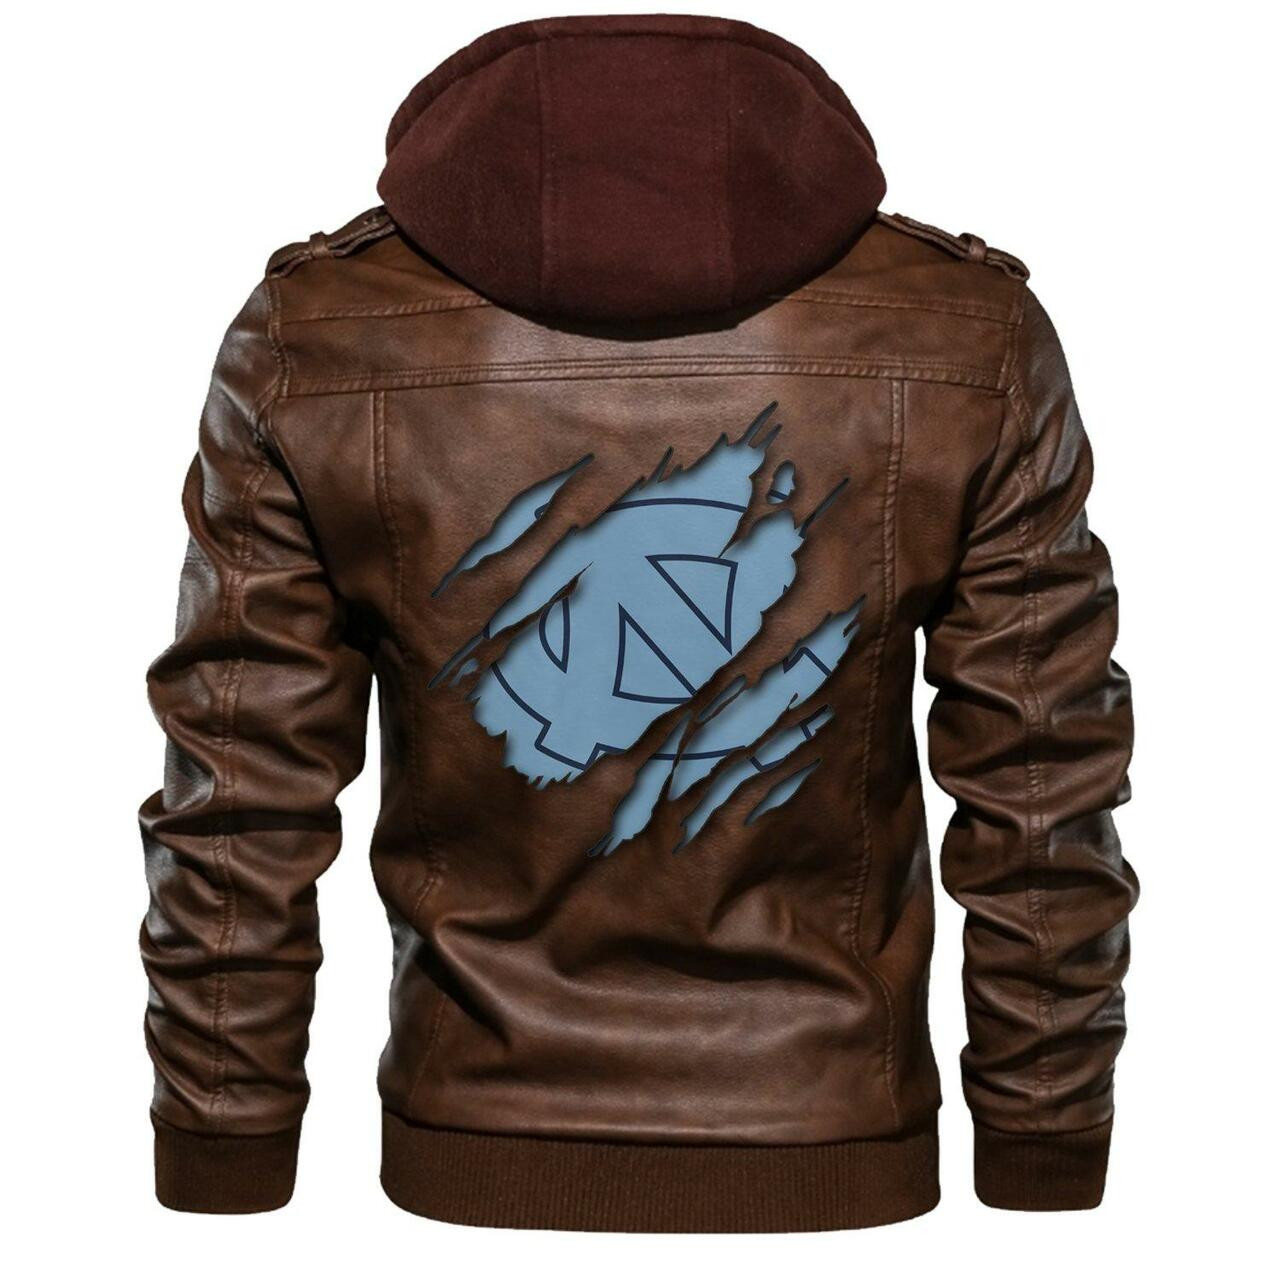 This leather Jacket will look great on you and make you stand out from the crowd 35